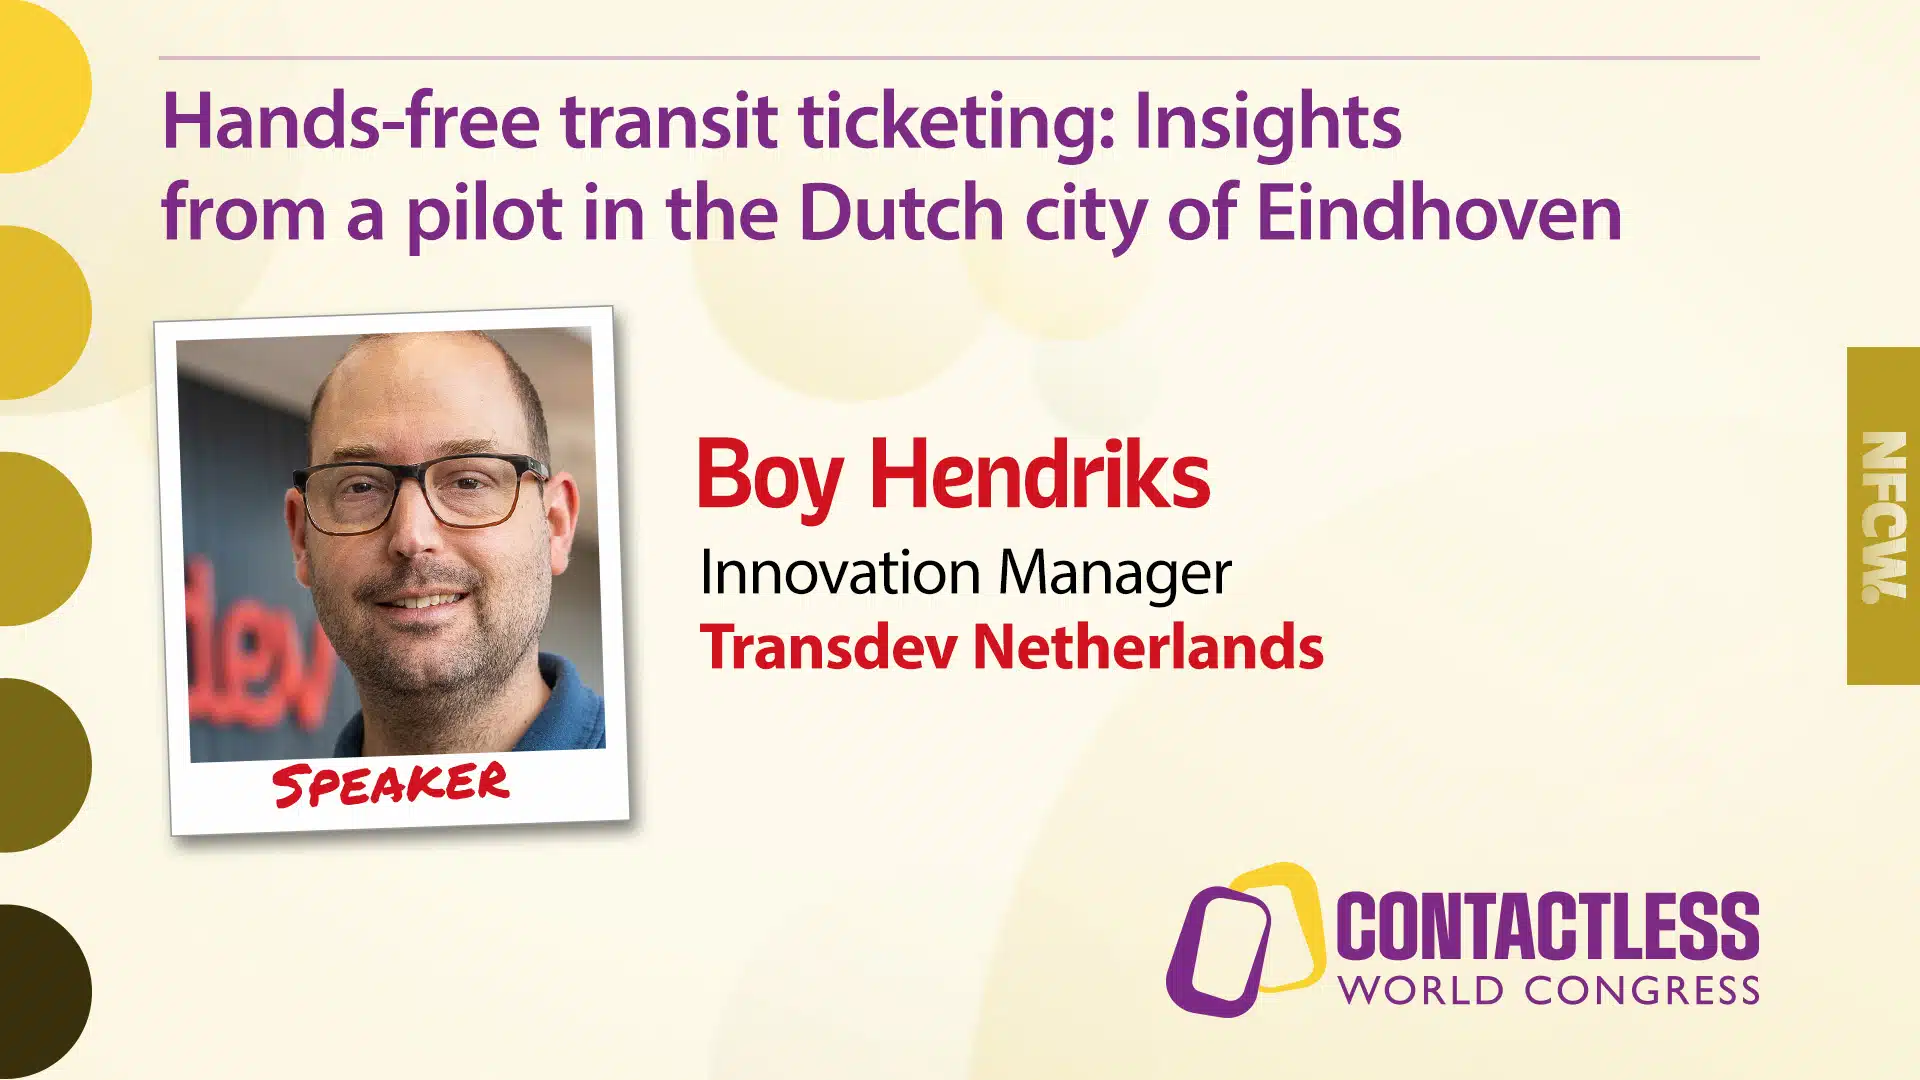 Hear Boy Hendriks from Transdev Netherlands talk about 'Hands-free ticketing: Insights from a pilot in the Dutch city of Eindhoven'